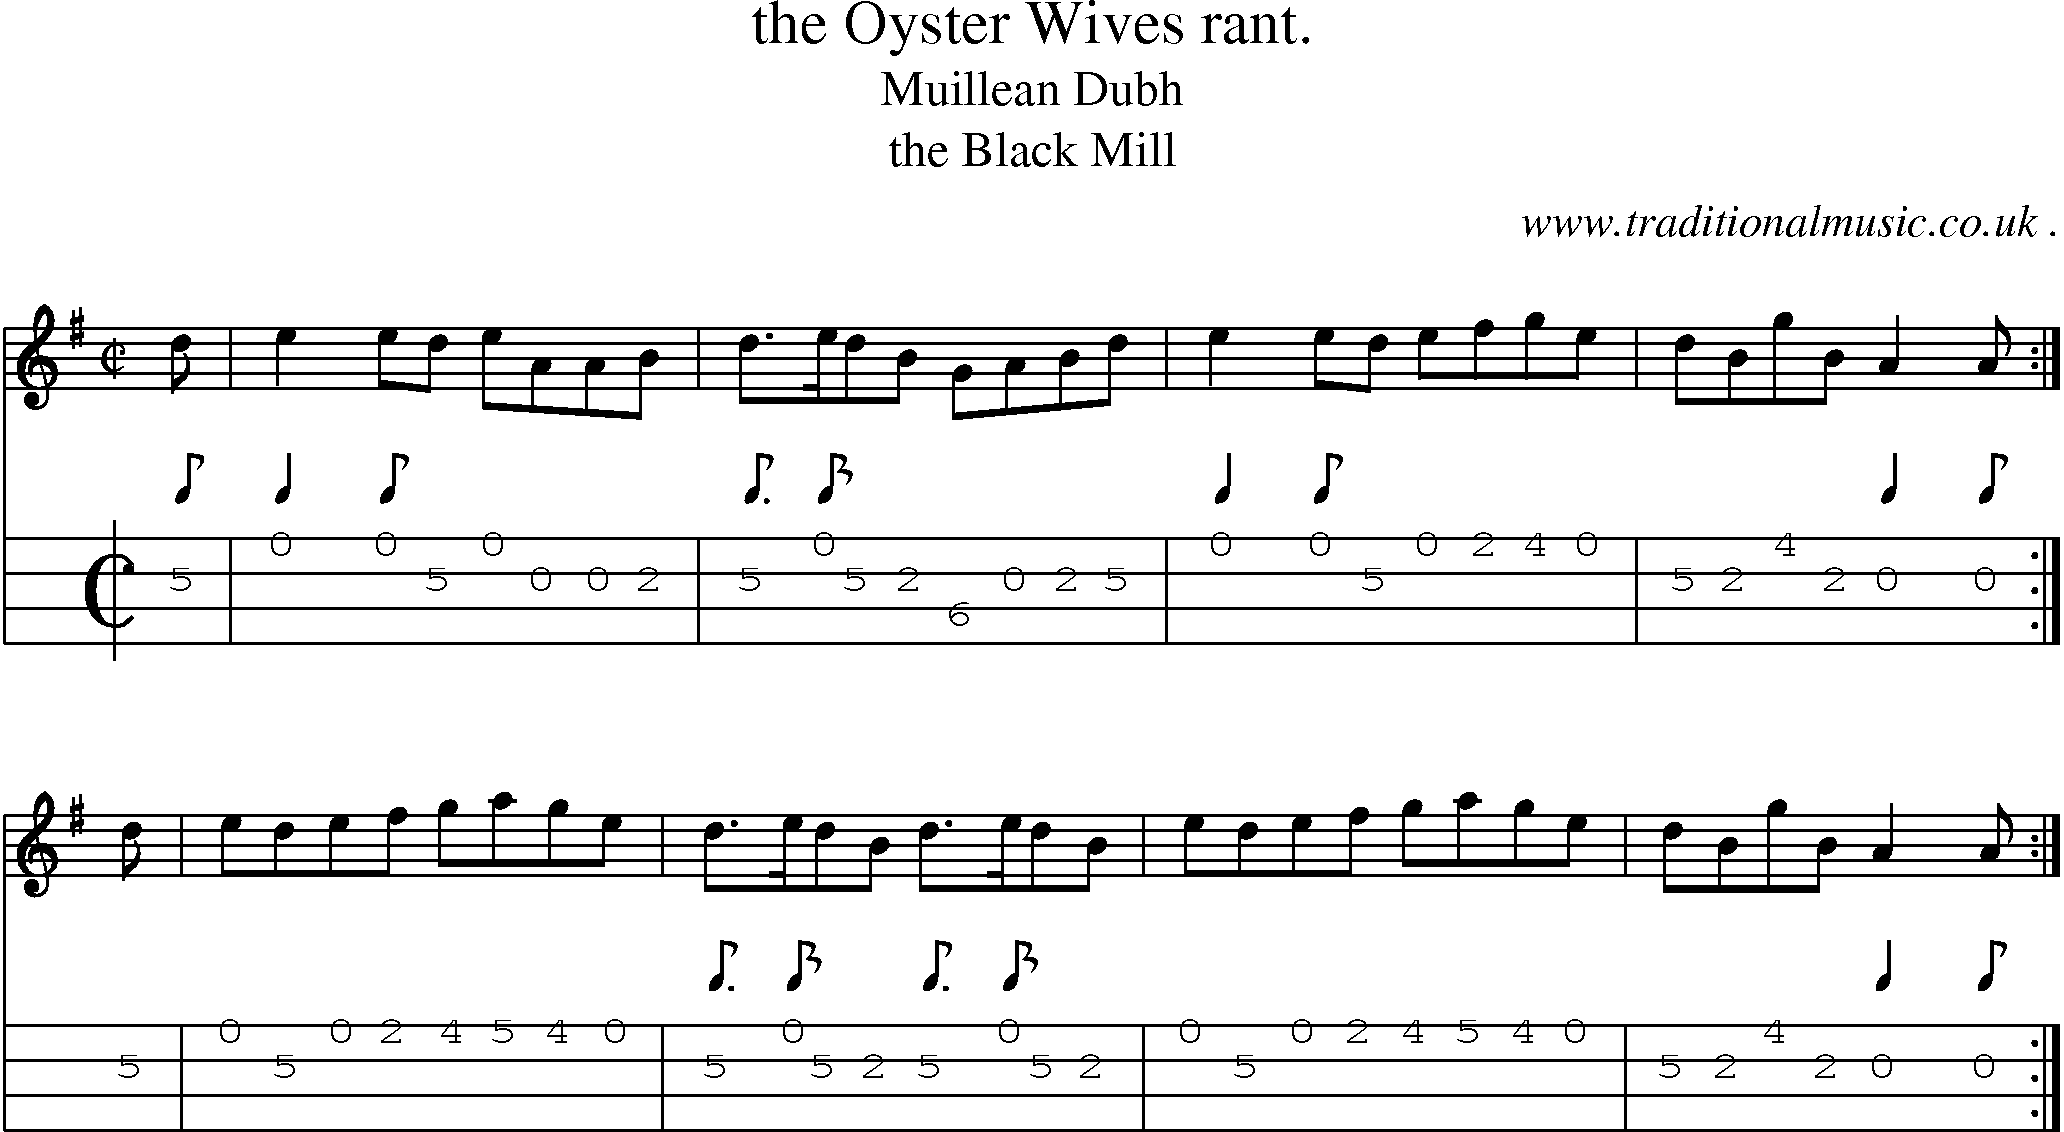 Sheet-Music and Mandolin Tabs for The Oyster Wives Rant